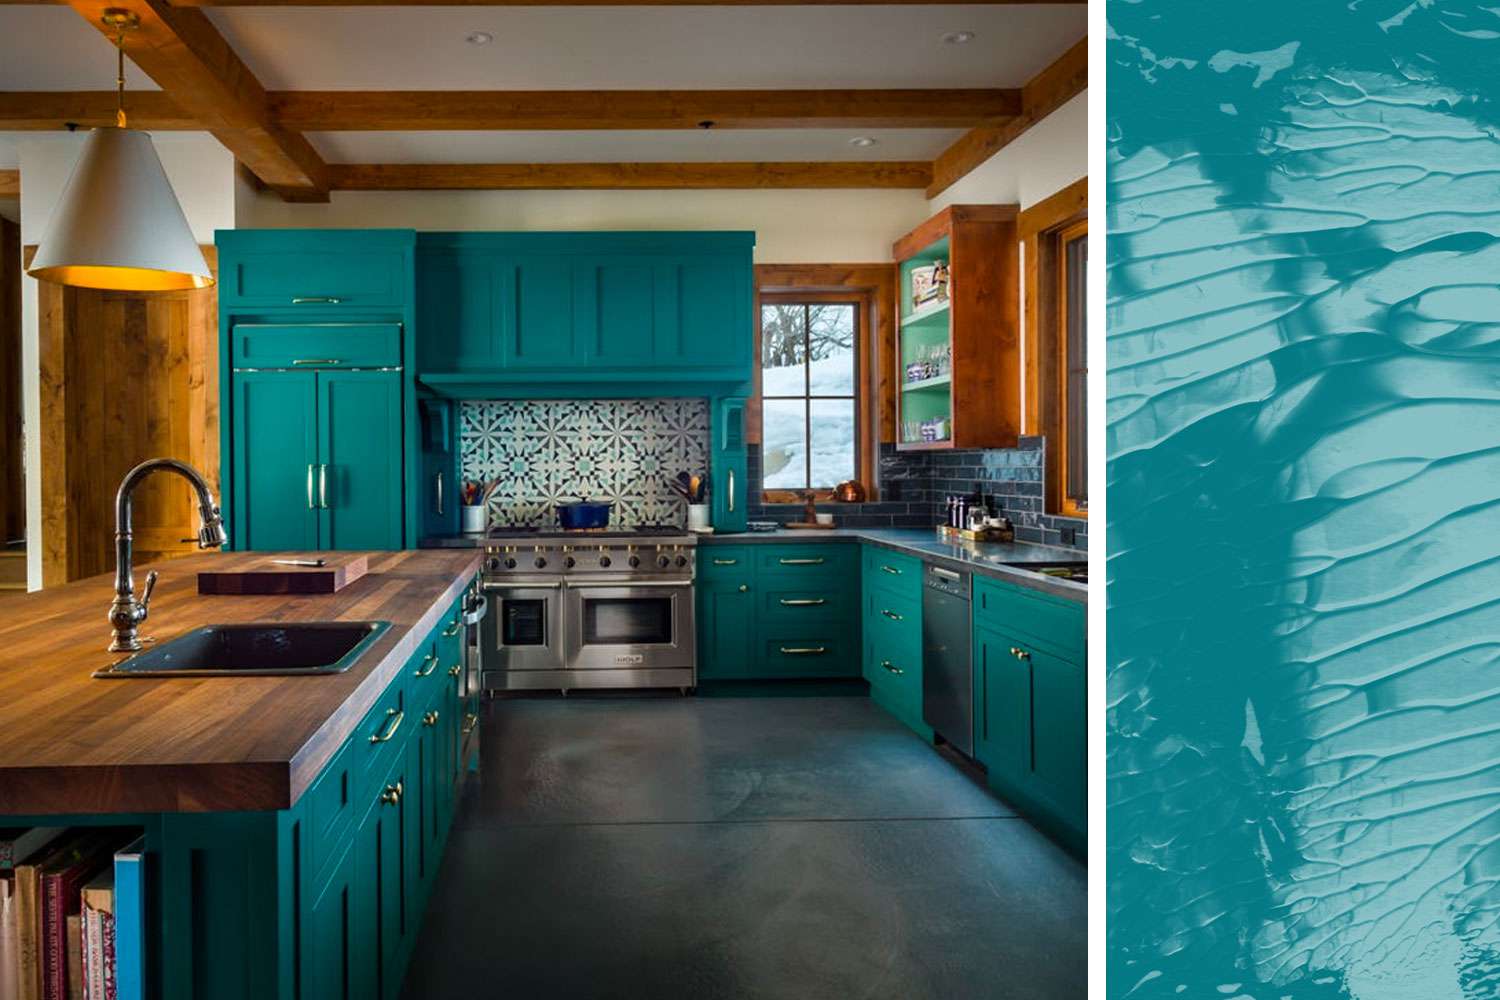 Behr The Real Teal cuisine inspiration and paint swatch